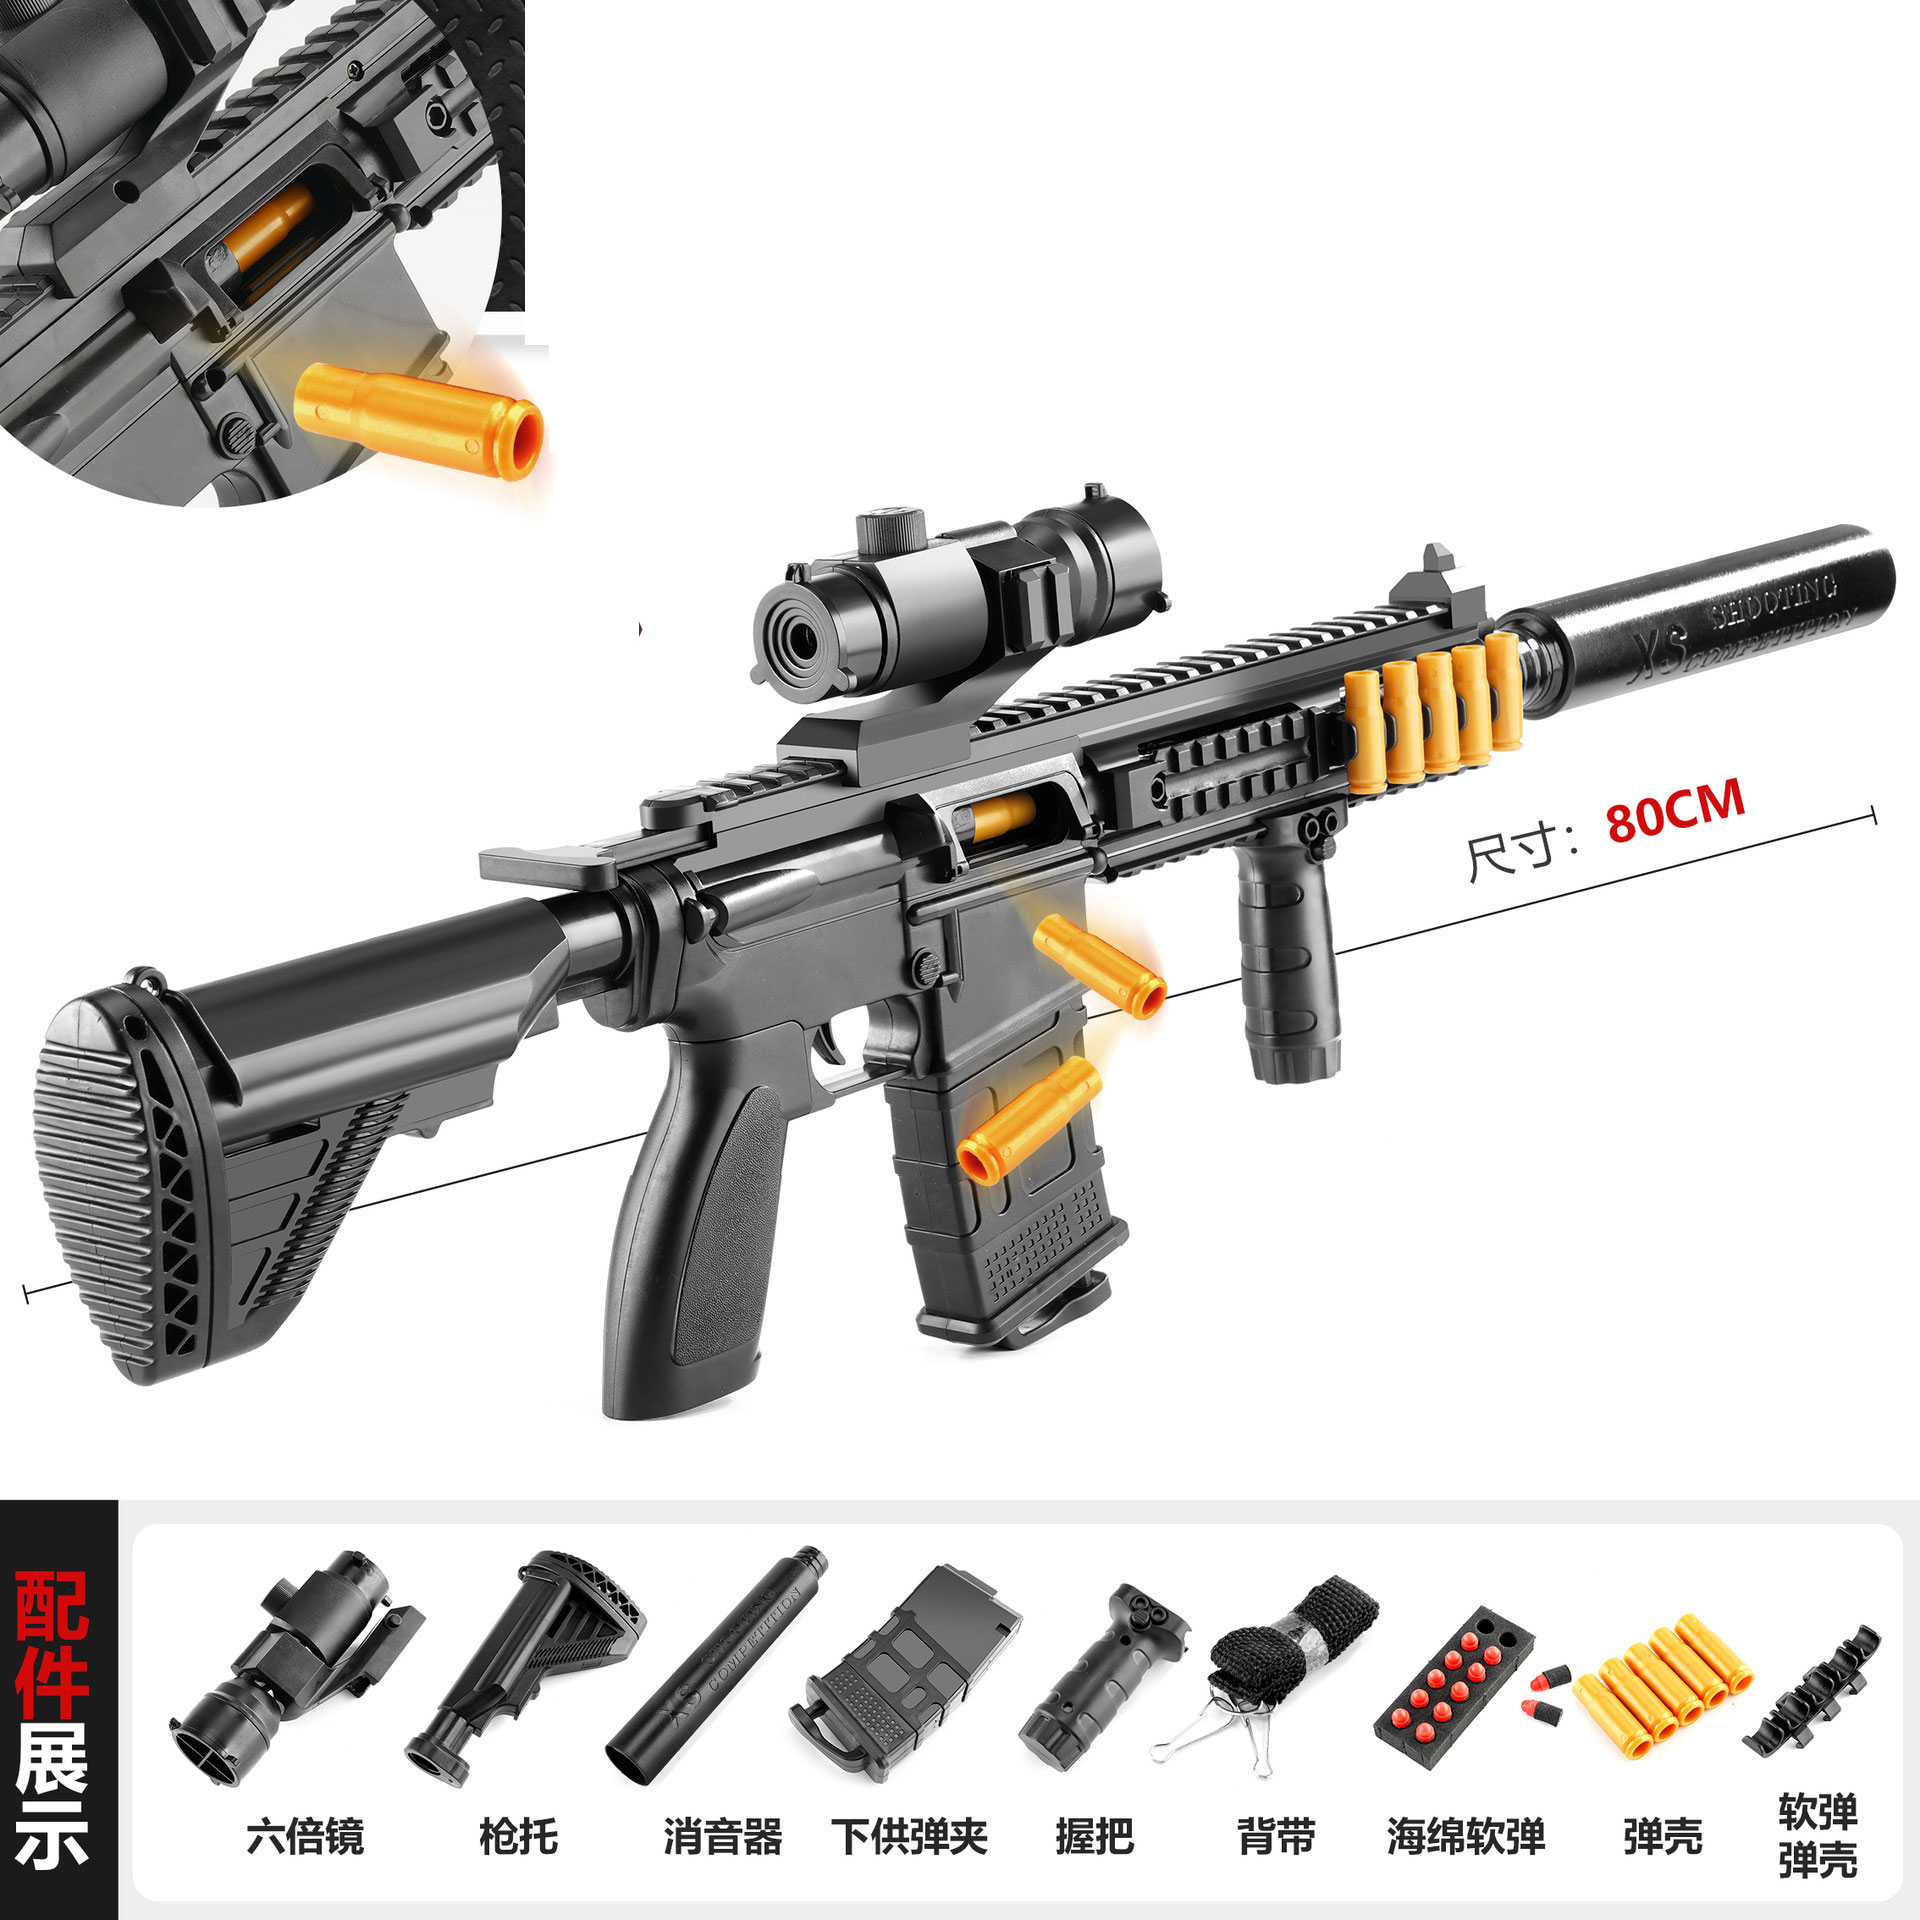 

M416 Foam Darts Shell Ejection Blaster Rifle Toy Gun Manual Shooting Launcher For Kids Boys Birthday Gifts Outdoor Games